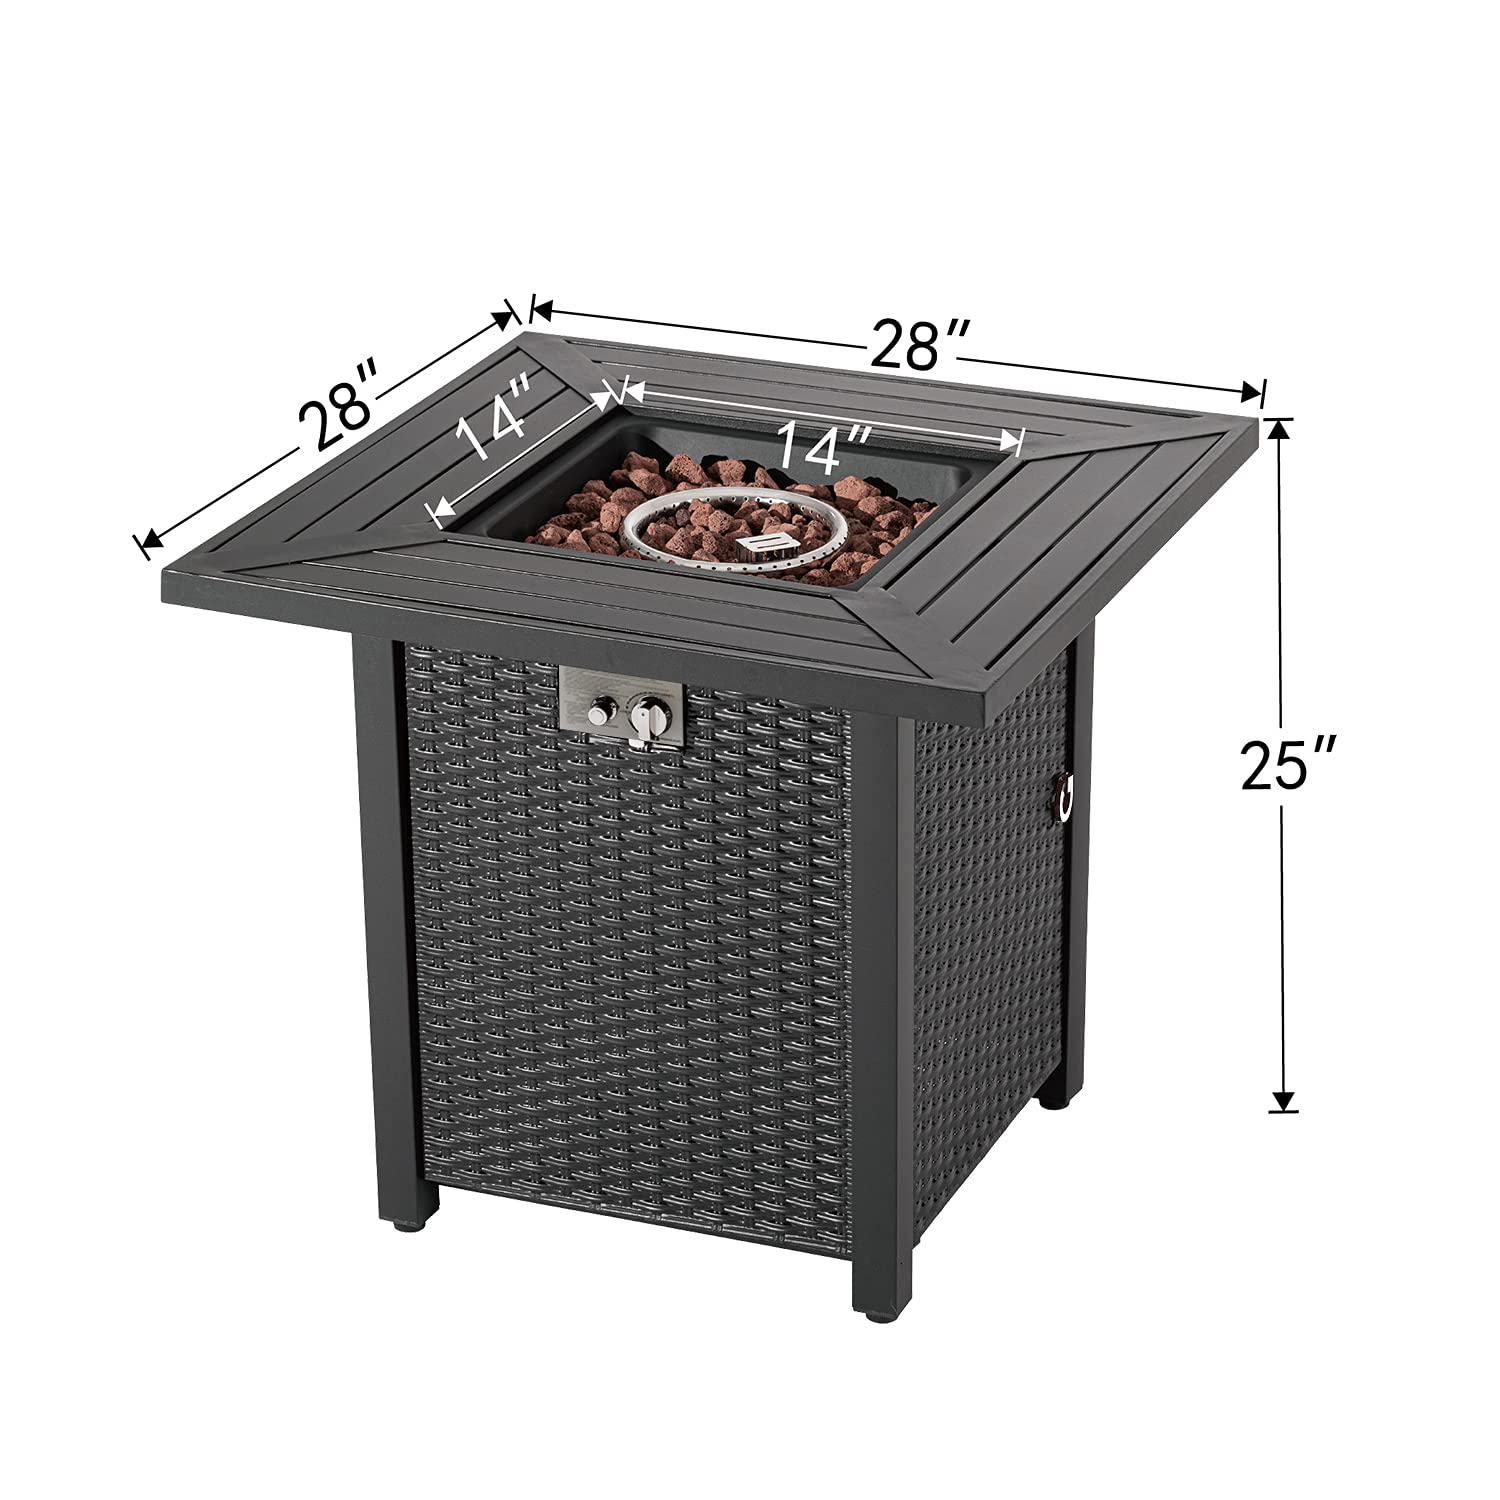 COSIEST Outdoor Metal Fire Table, 28-inch Square Black Brown Fire Pit Outdoor Companion, Auto-Ignition Fire Bowl w Imitation Wicker Base, Internal Propane Tank, Free Brown Lava Rocks